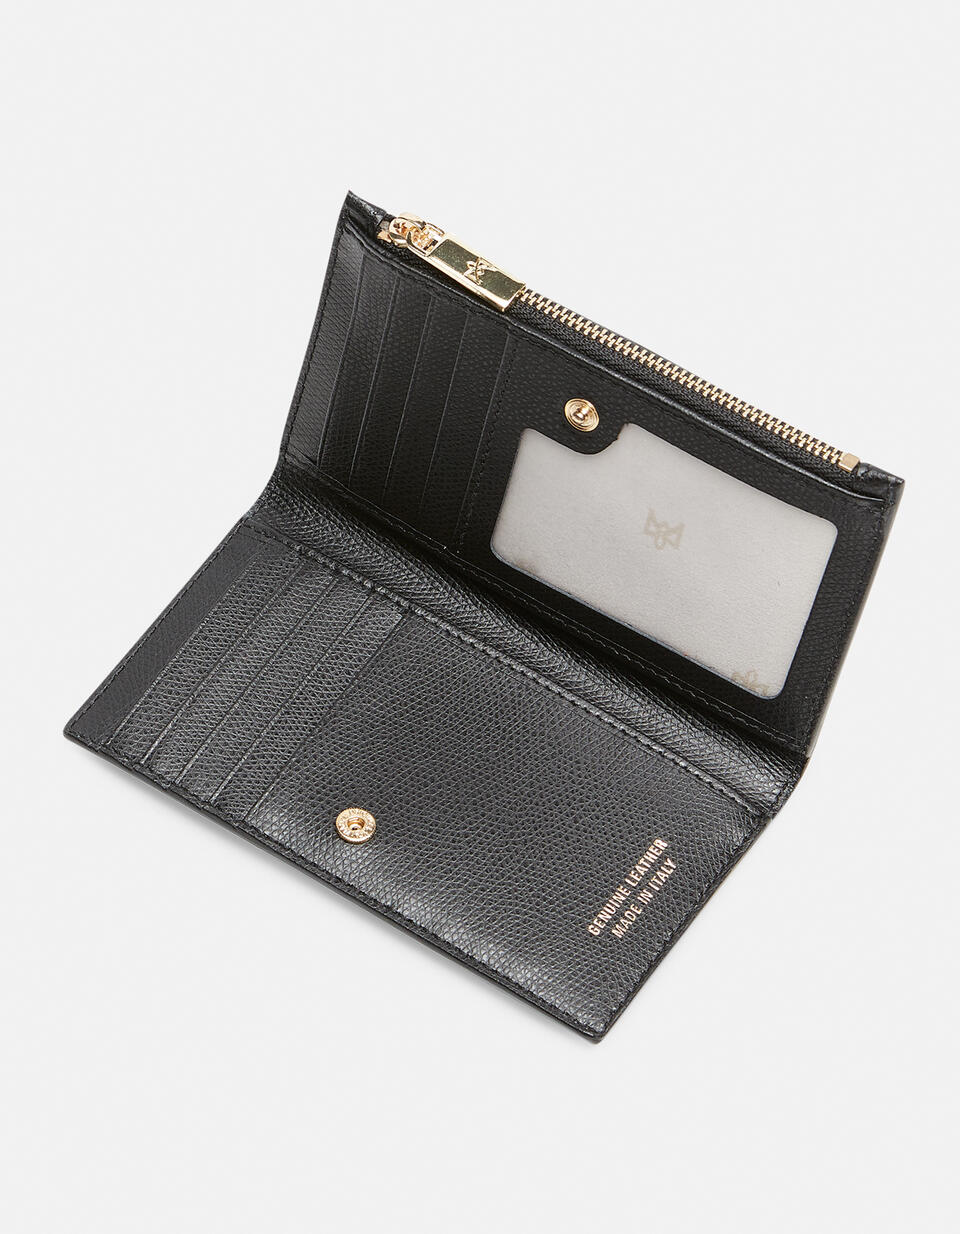 Card holder with coin purse - Women's Wallets - Women's Wallets | Wallets NERO - Women's Wallets - Women's Wallets | WalletsCuoieria Fiorentina